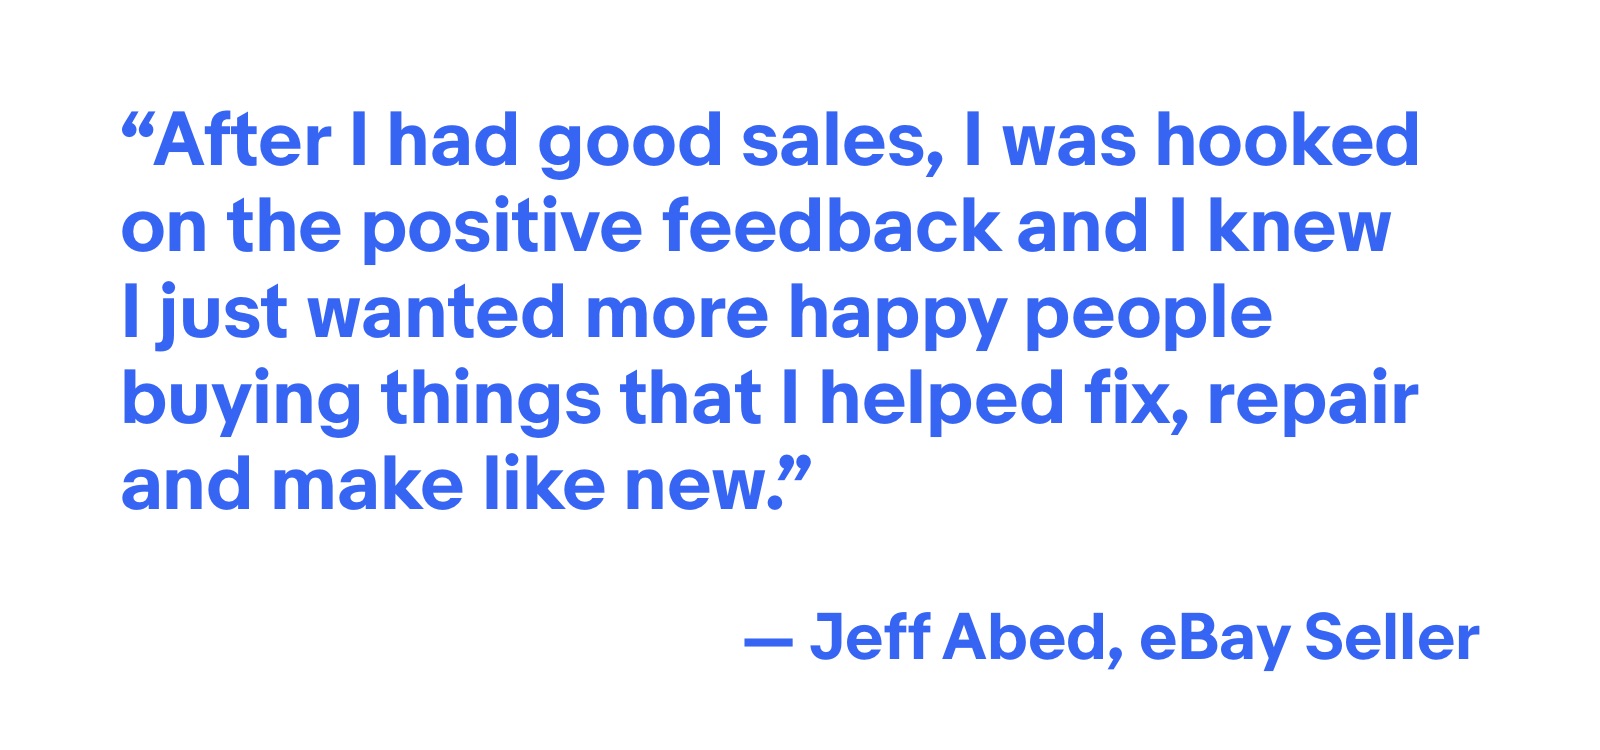 After I had good sales, I was hooked on the positive feedback. - Jeff Abed, eBay Seller